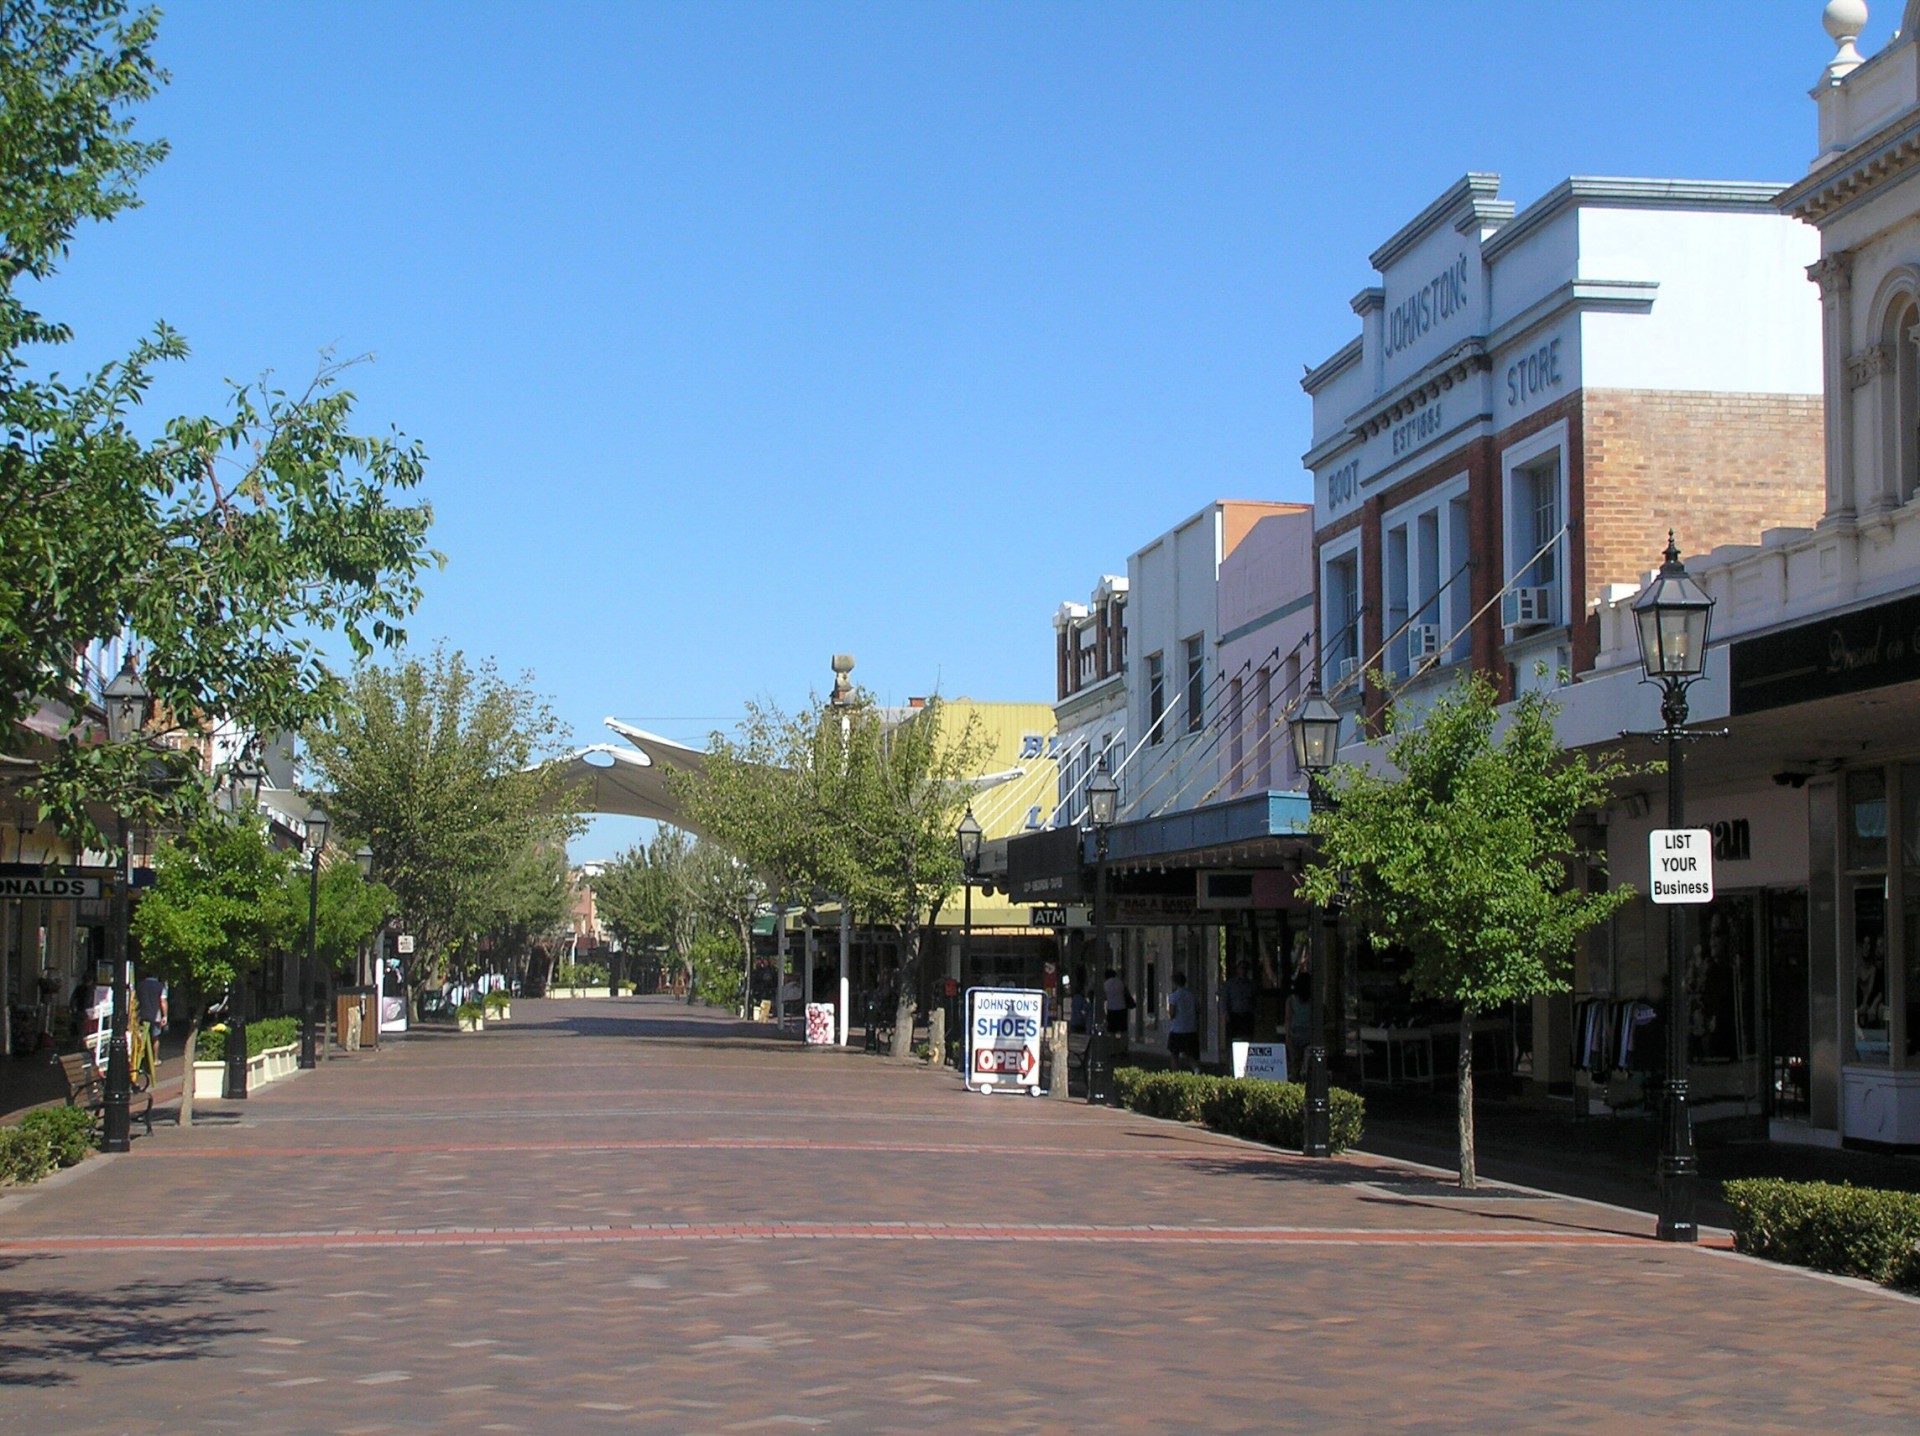 Maitland New South Wales